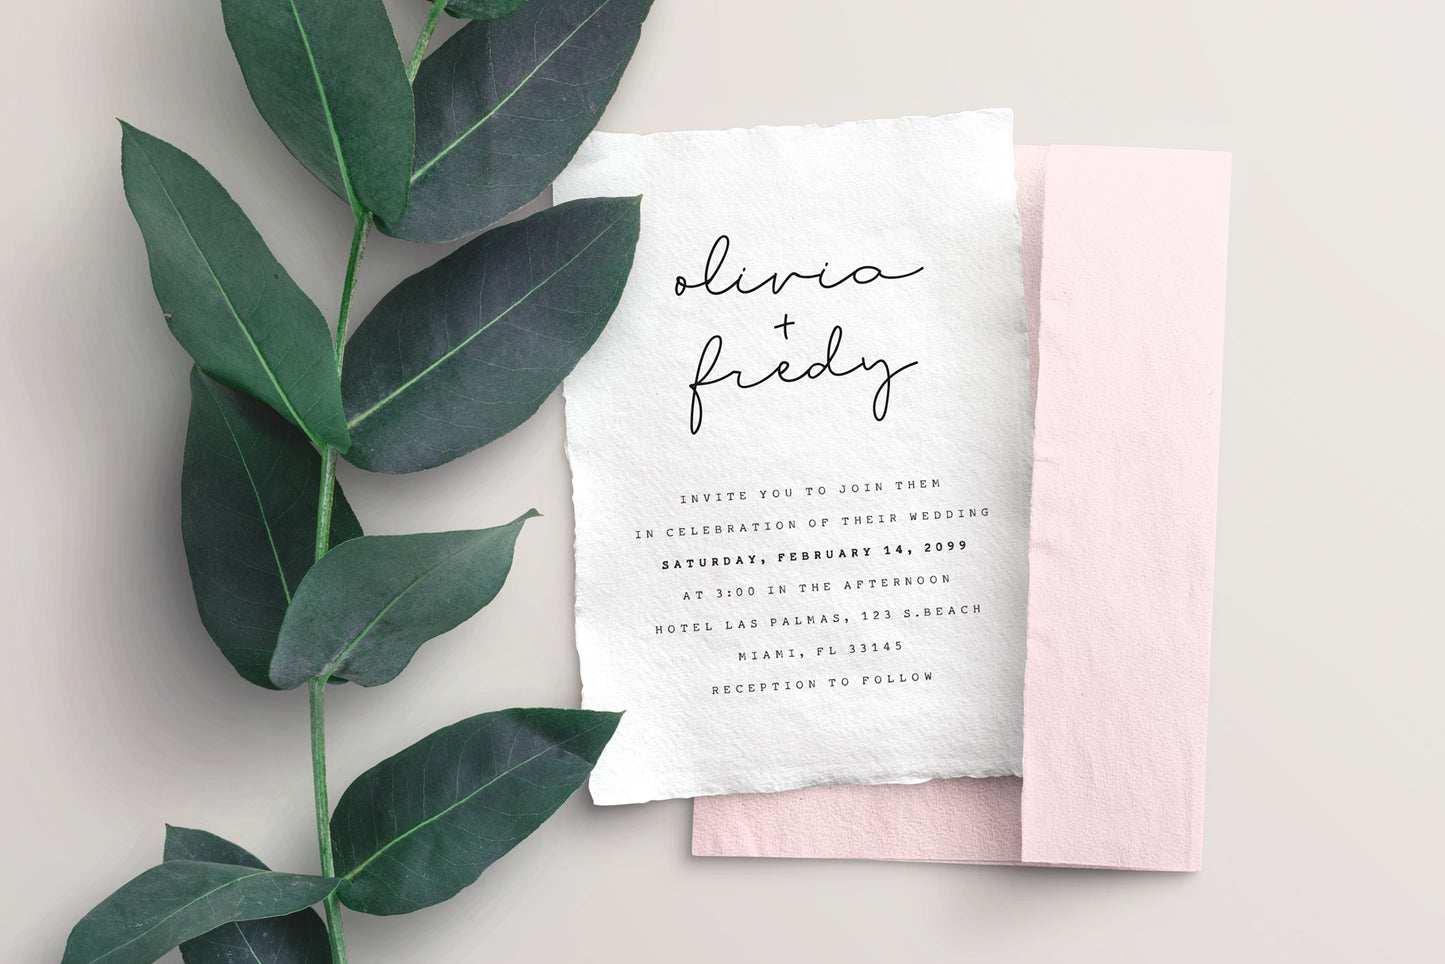 Apothecary Script Font Duo